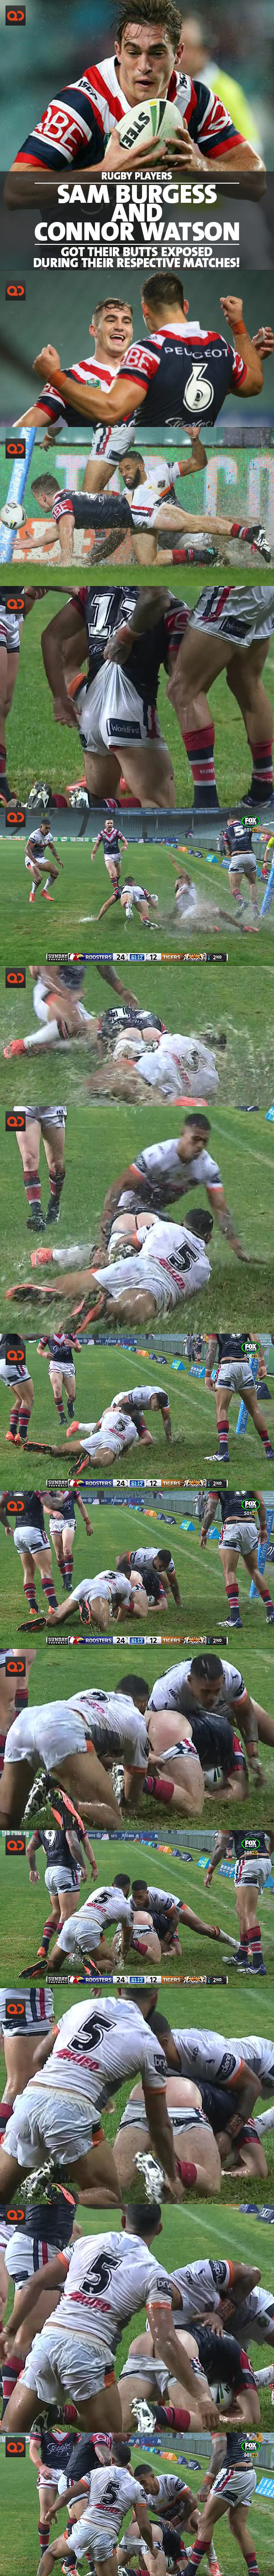 qc-rugby_players_sam_burgess_and_connor_watson_butts_exposed_during_their_matches-collage03